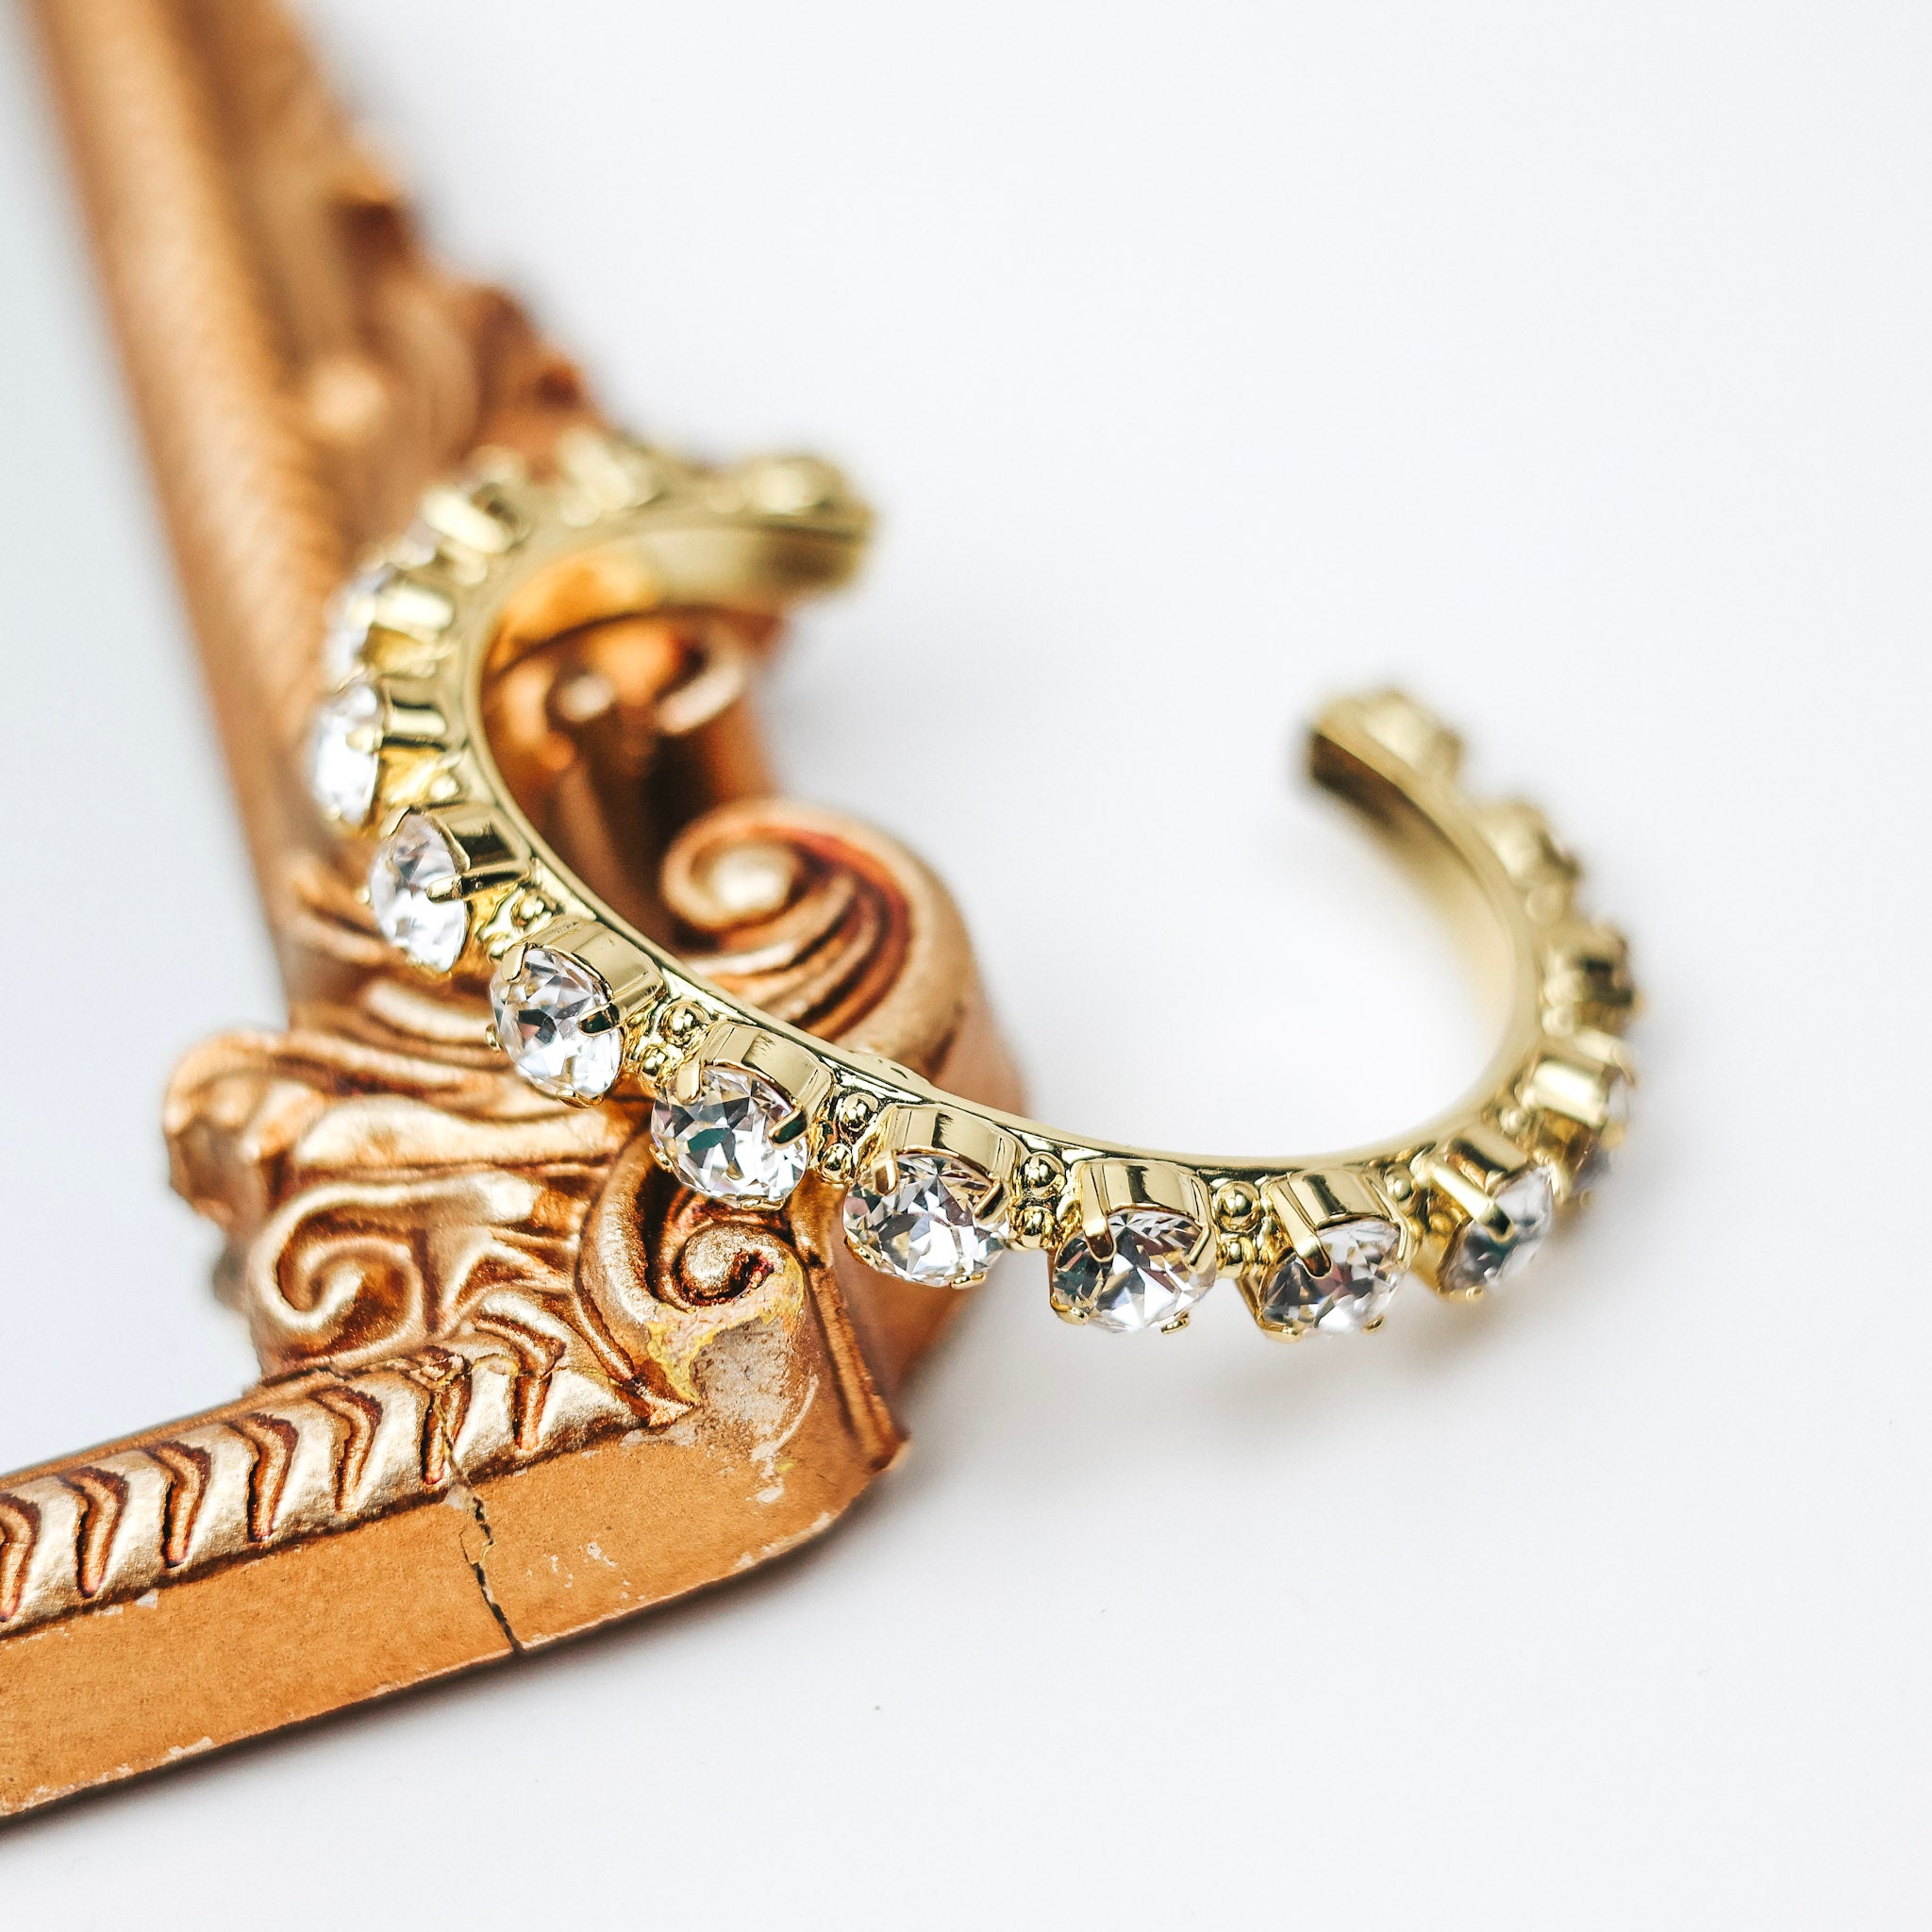 Sorrelli | Riveting Romance Cuff Bracelet in Bright Gold Tone and Crystal - Giddy Up Glamour Boutique